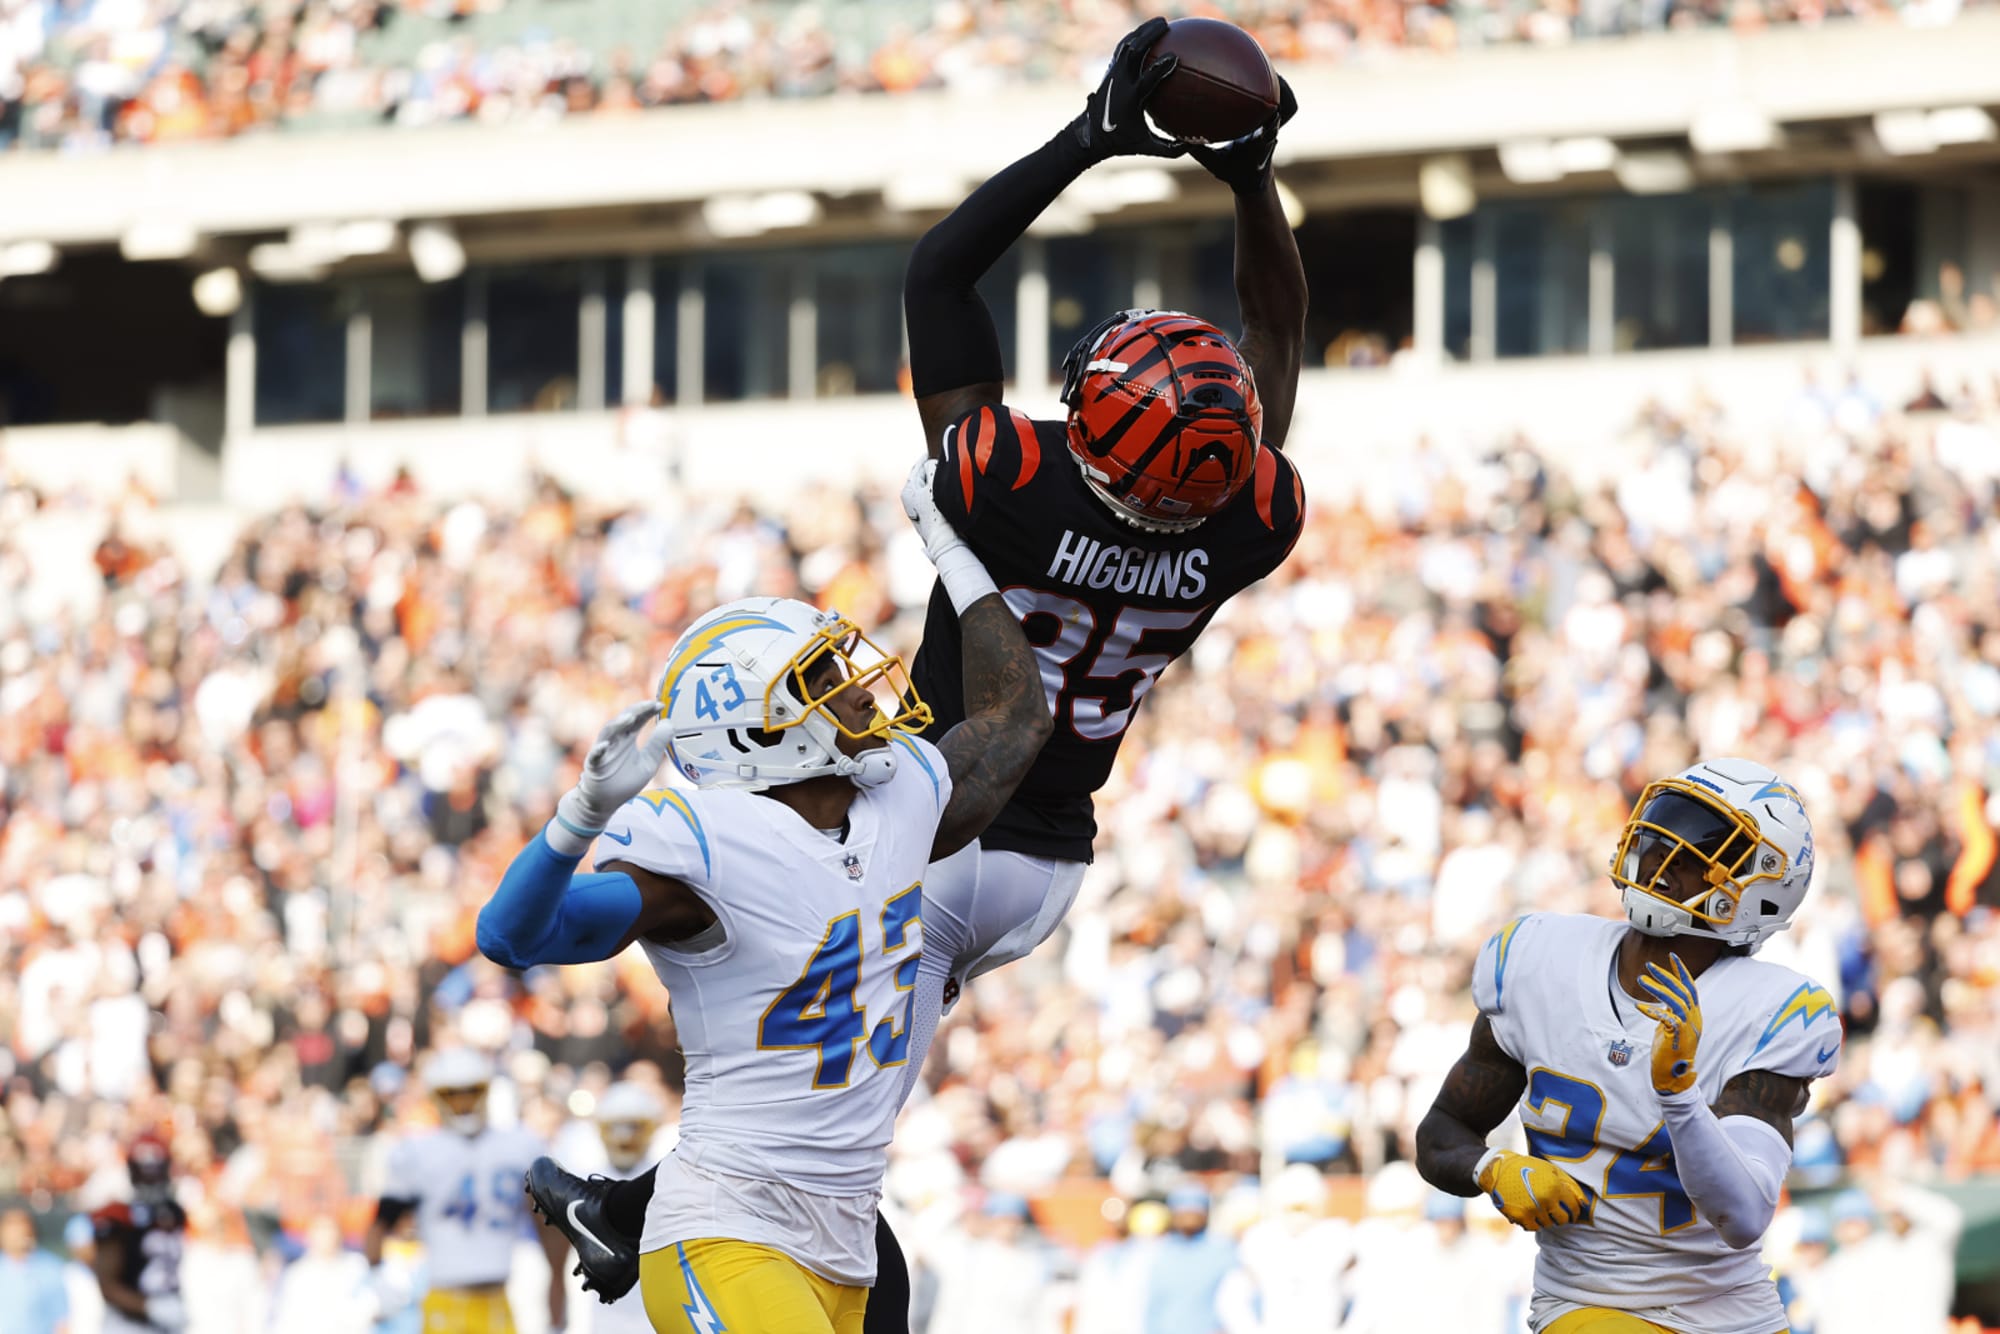 Cincinnati Bengals: Higgins addresses lack of 'energy' in loss to Chargers